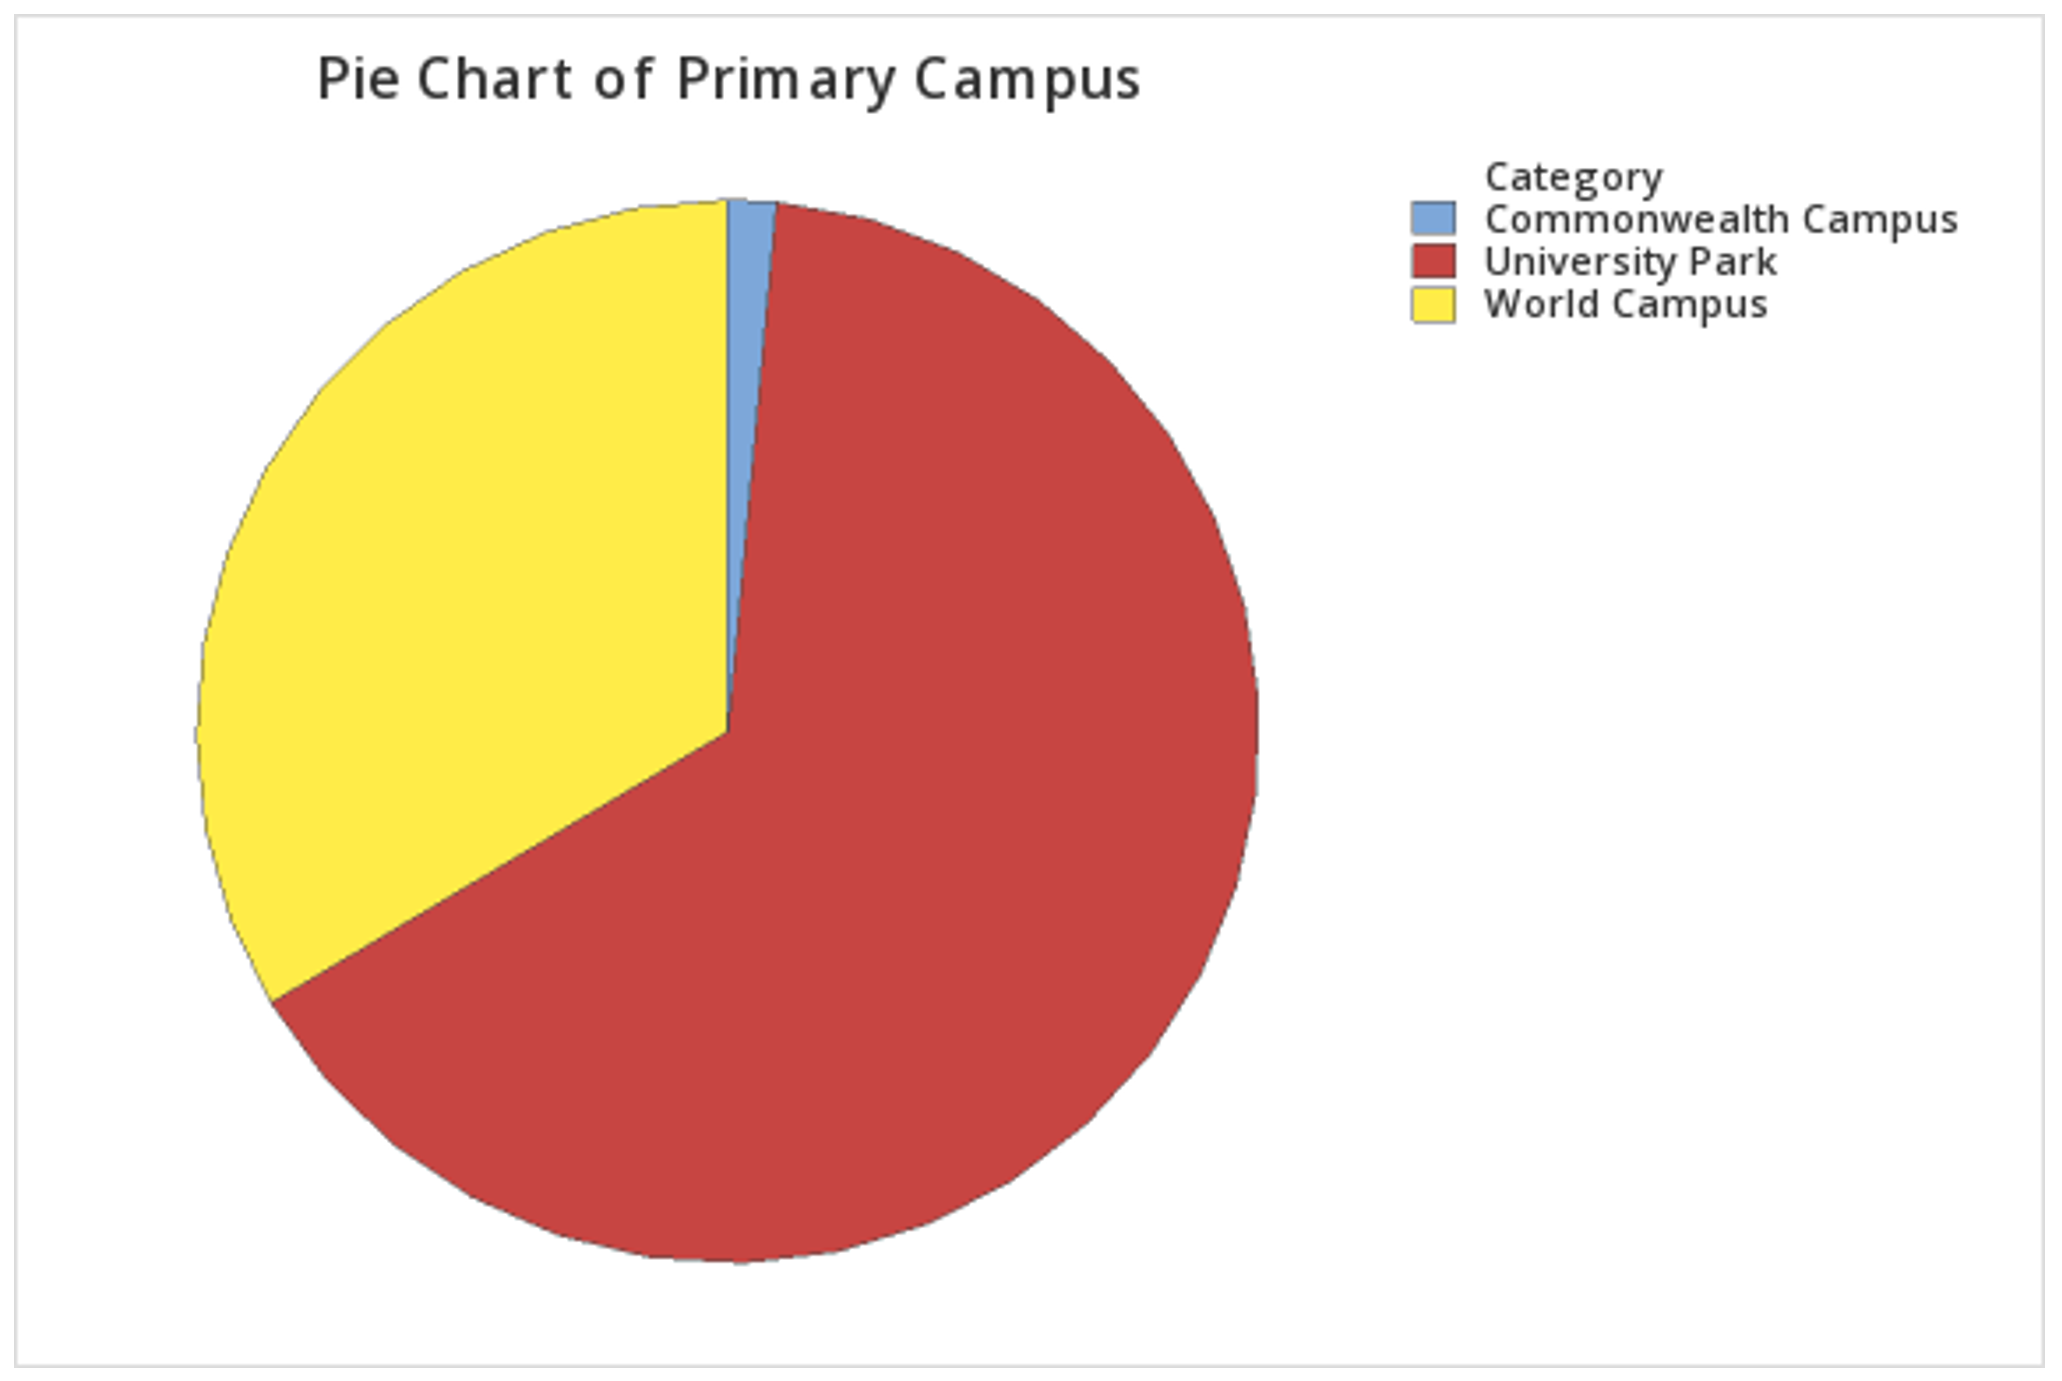 Pie chart of primary campus made in Minitab